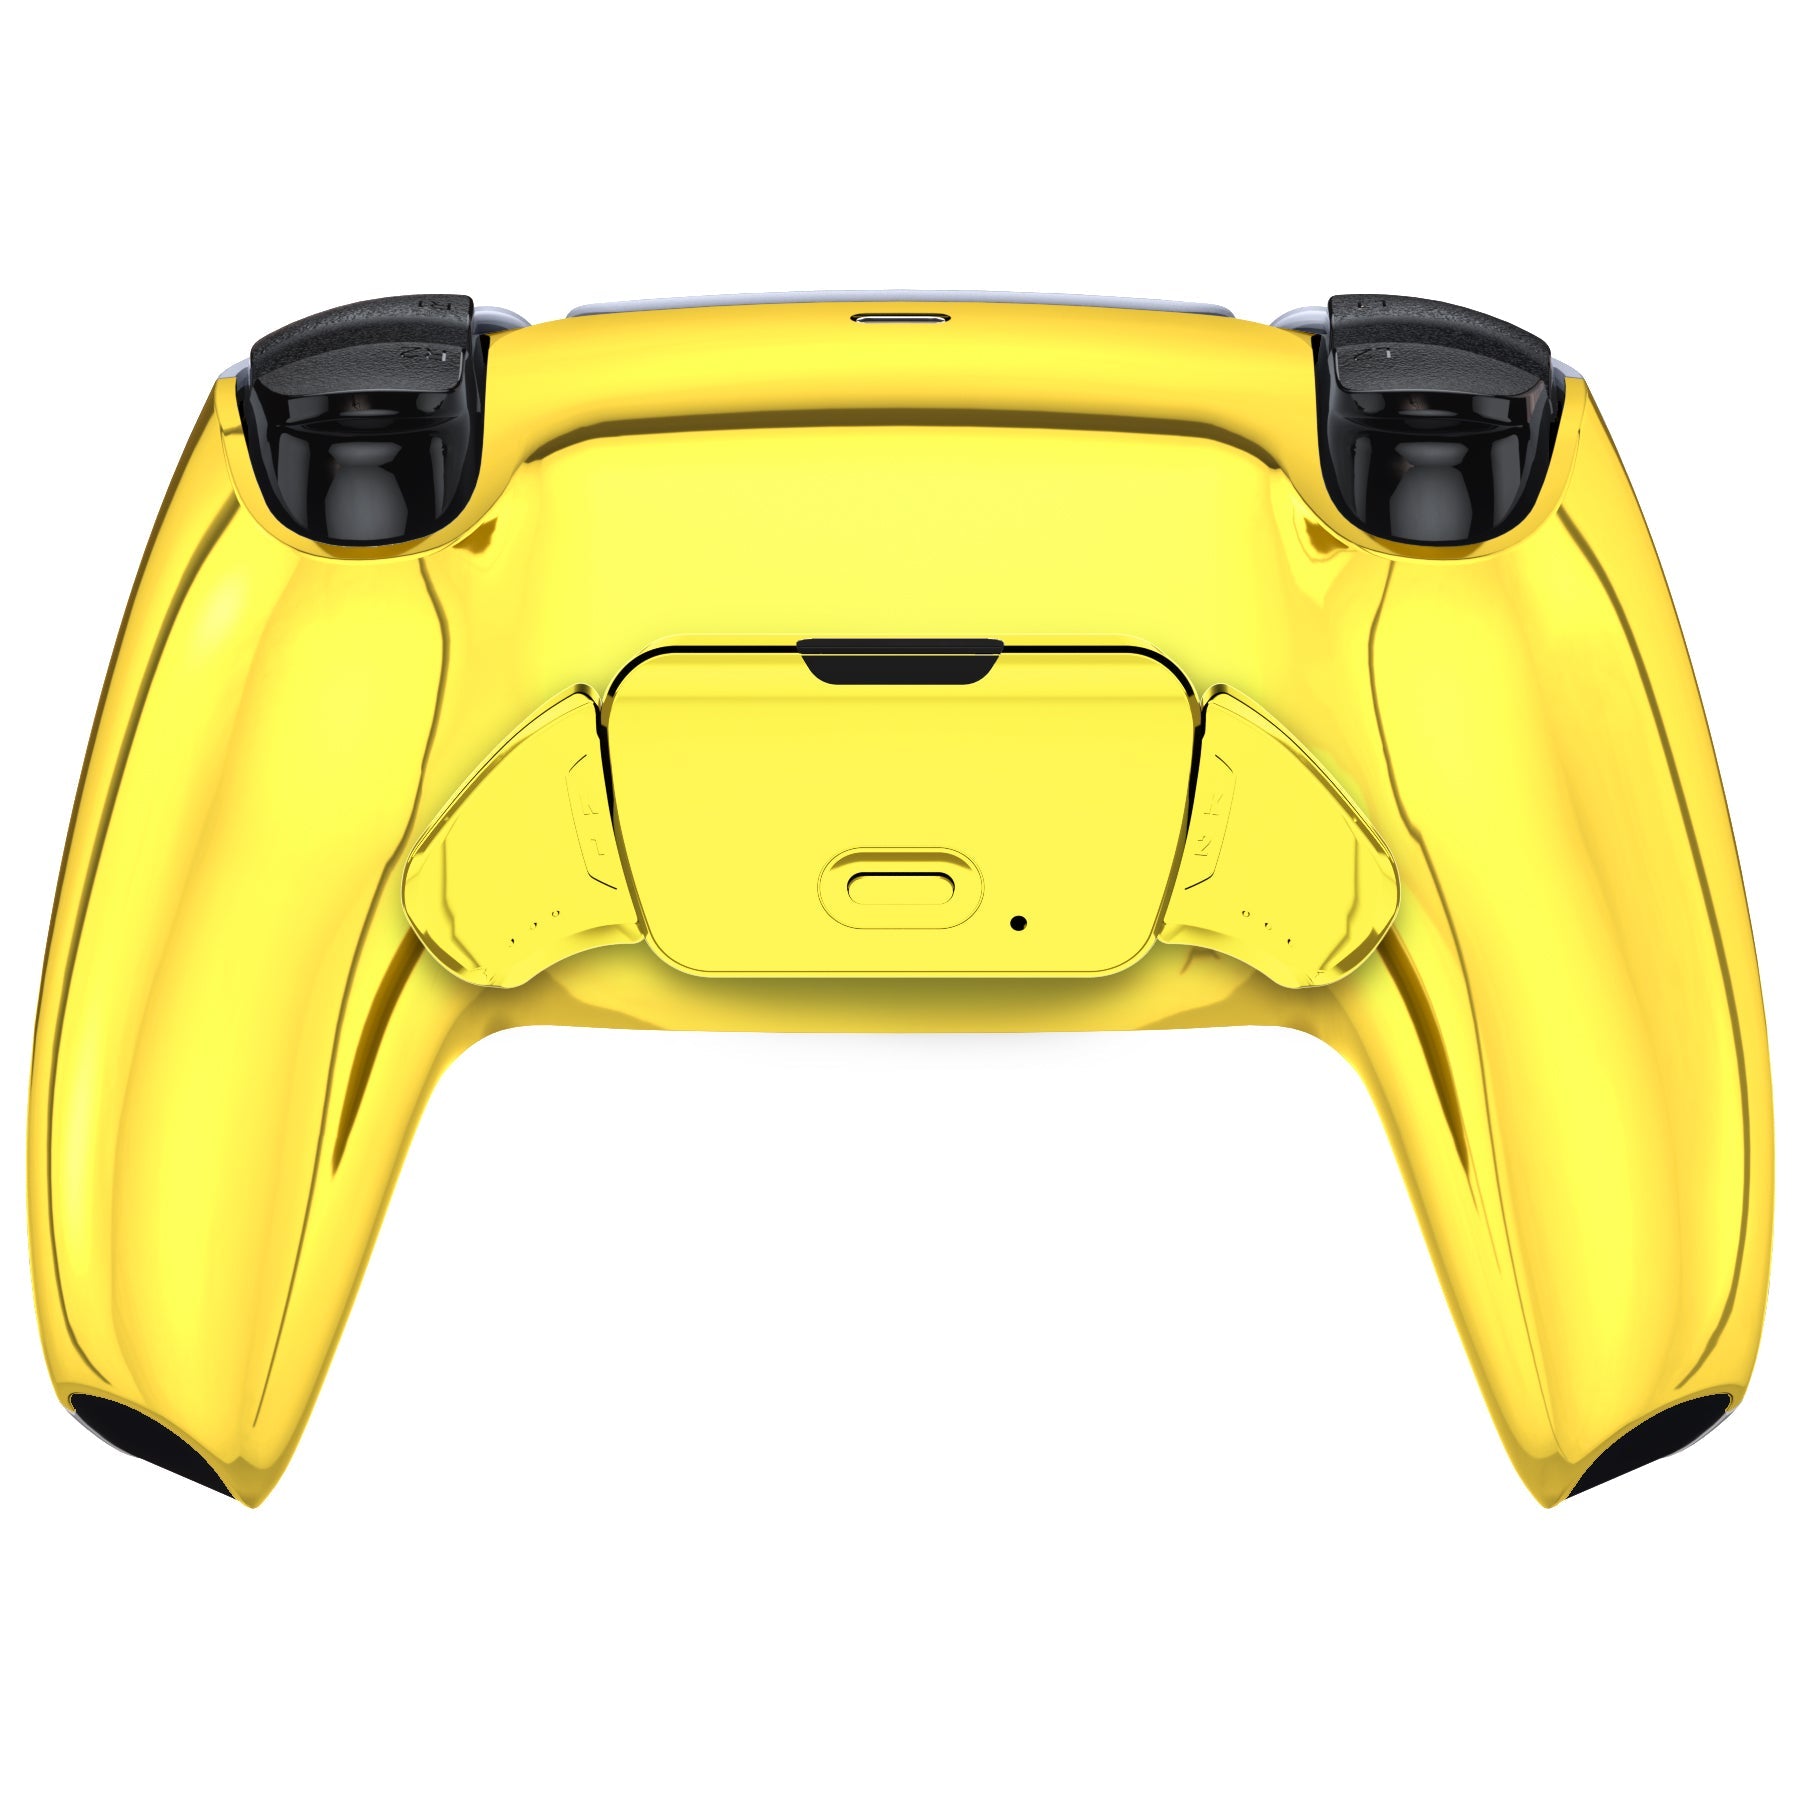 eXtremeRate Retail Chrome Gold Back Paddles Remappable Rise Remap Kit with Upgrade Board & Redesigned Back Shell & Back Buttons Attachment for PS5 Controller BDM-010 &BDM-020 - XPFD4001G2